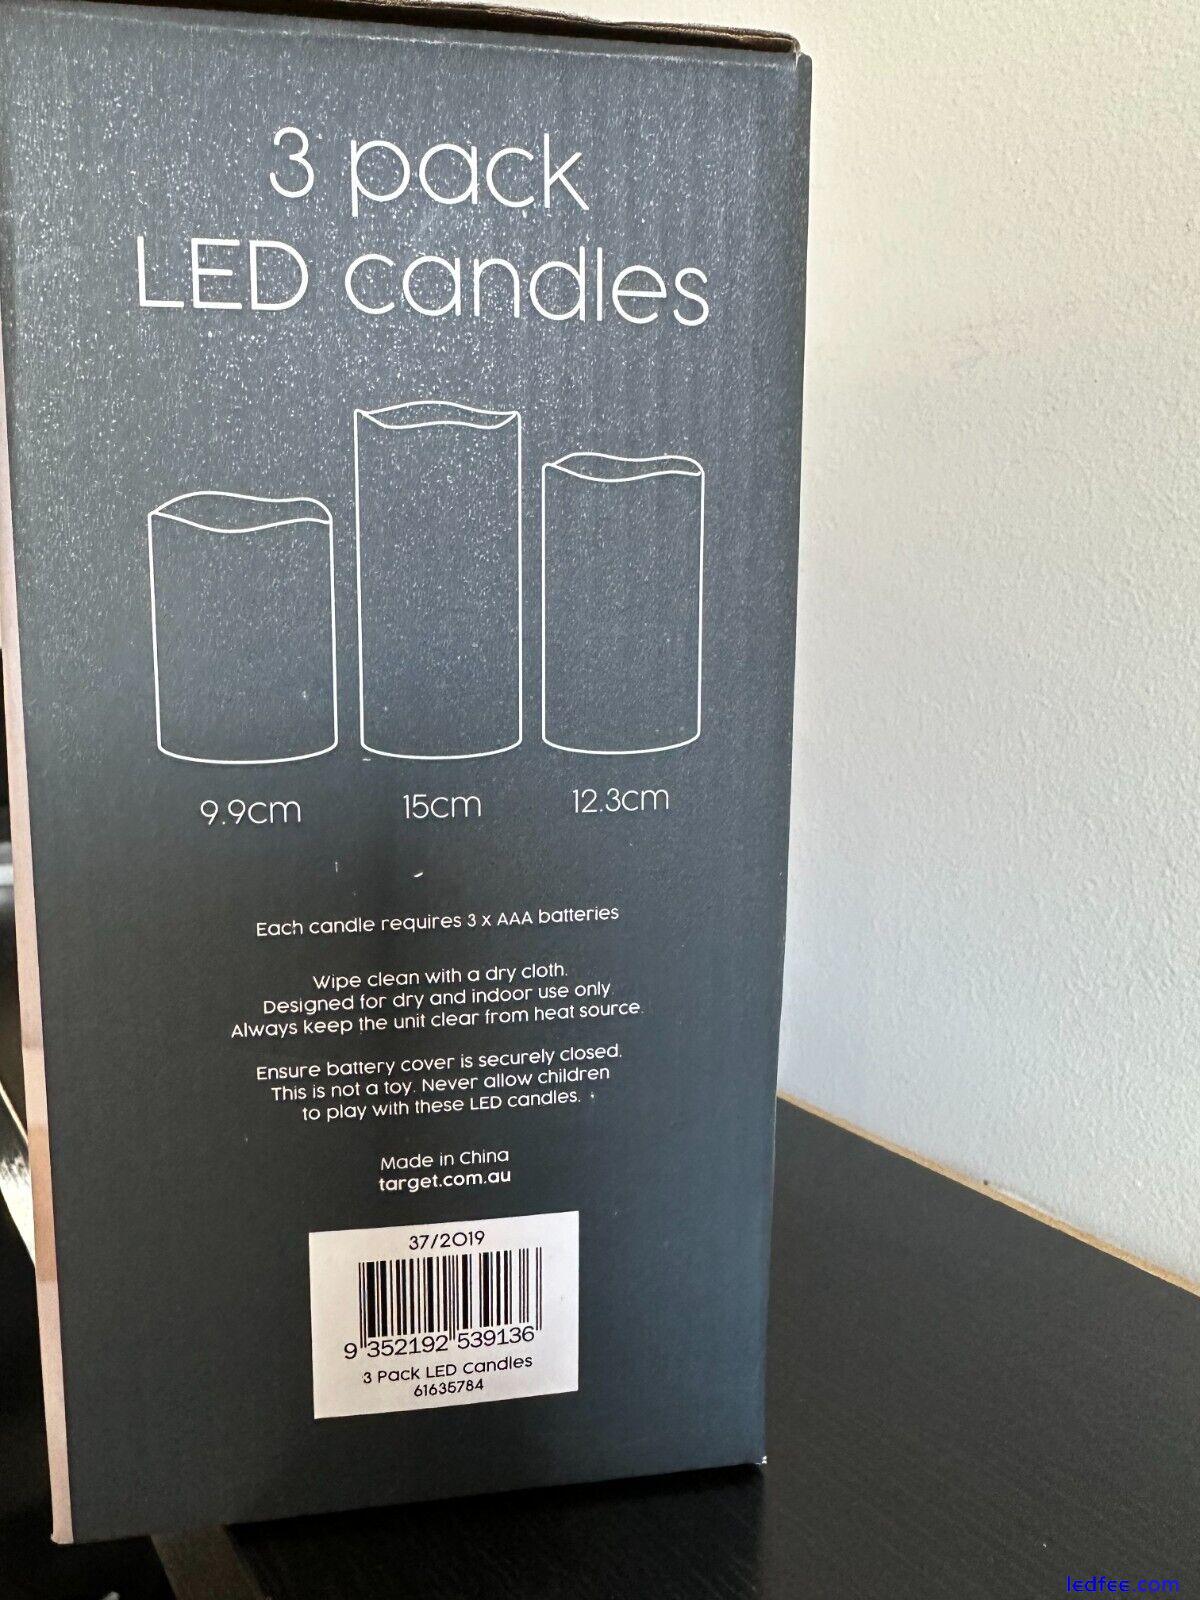 3 PACK LED CANDLES BATTERY OPERATED WAX COATED WARM WHITE LIGHT 0 